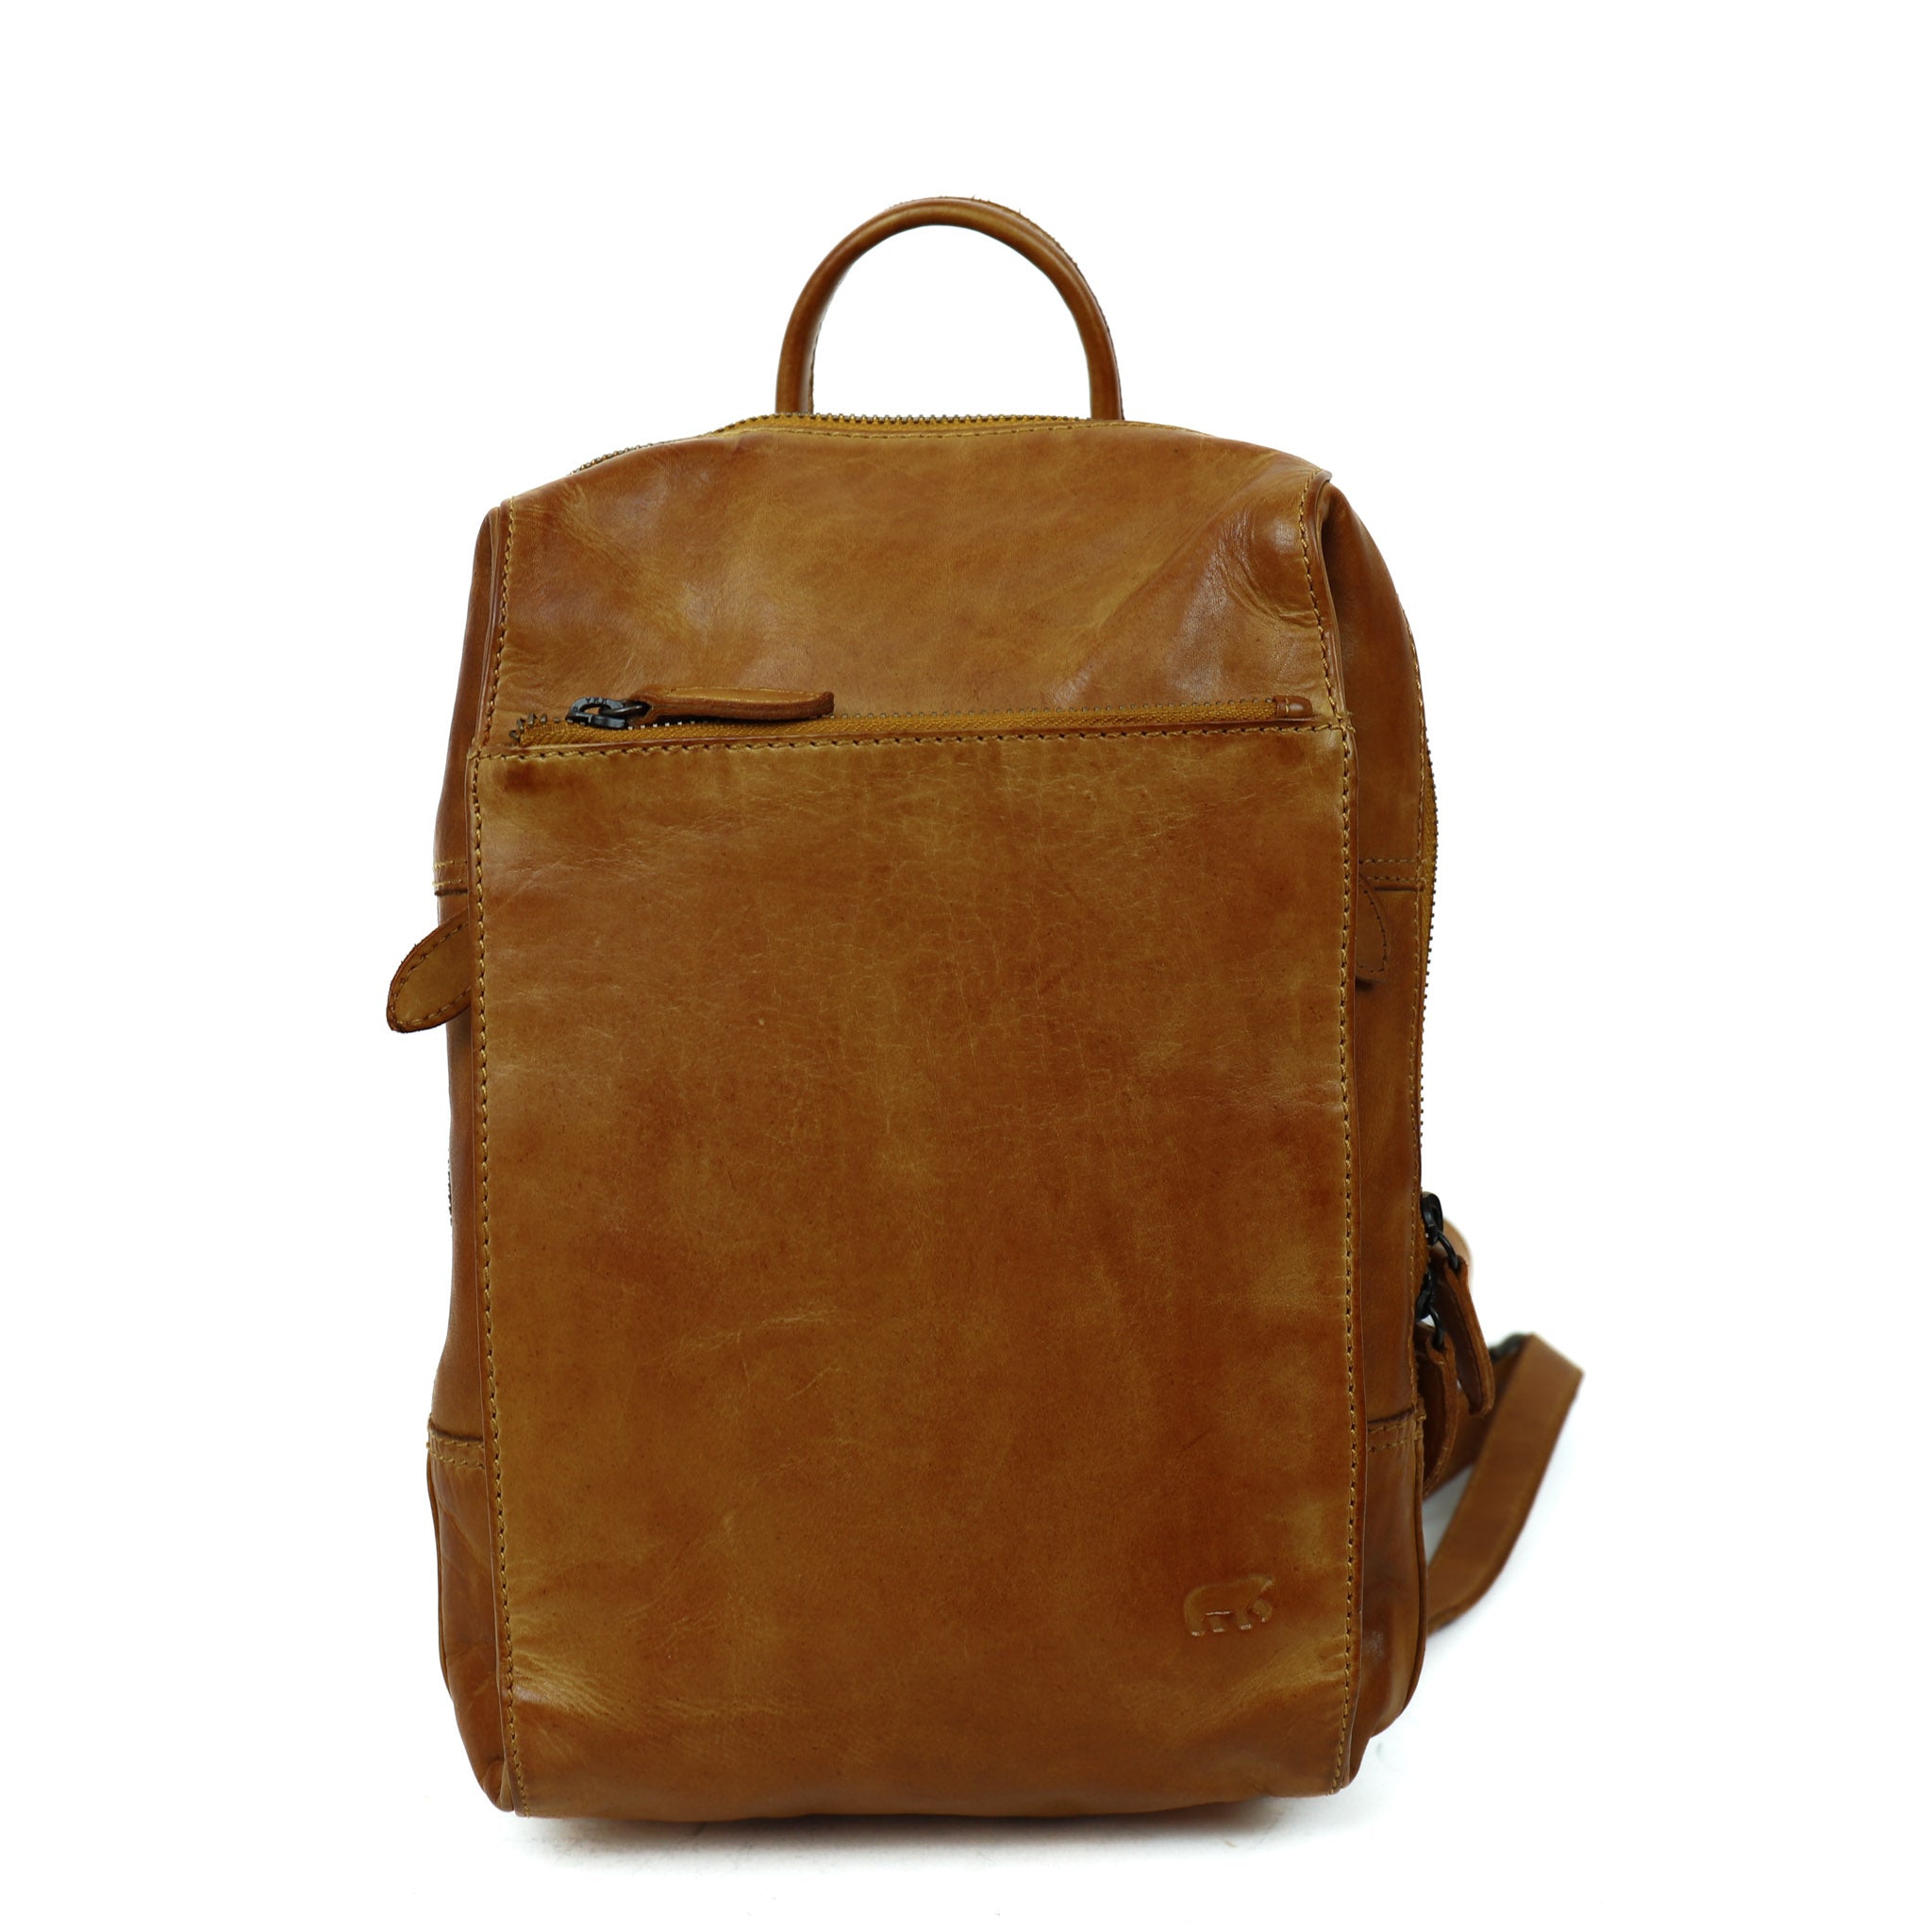 Backpack 'Sil' yellow